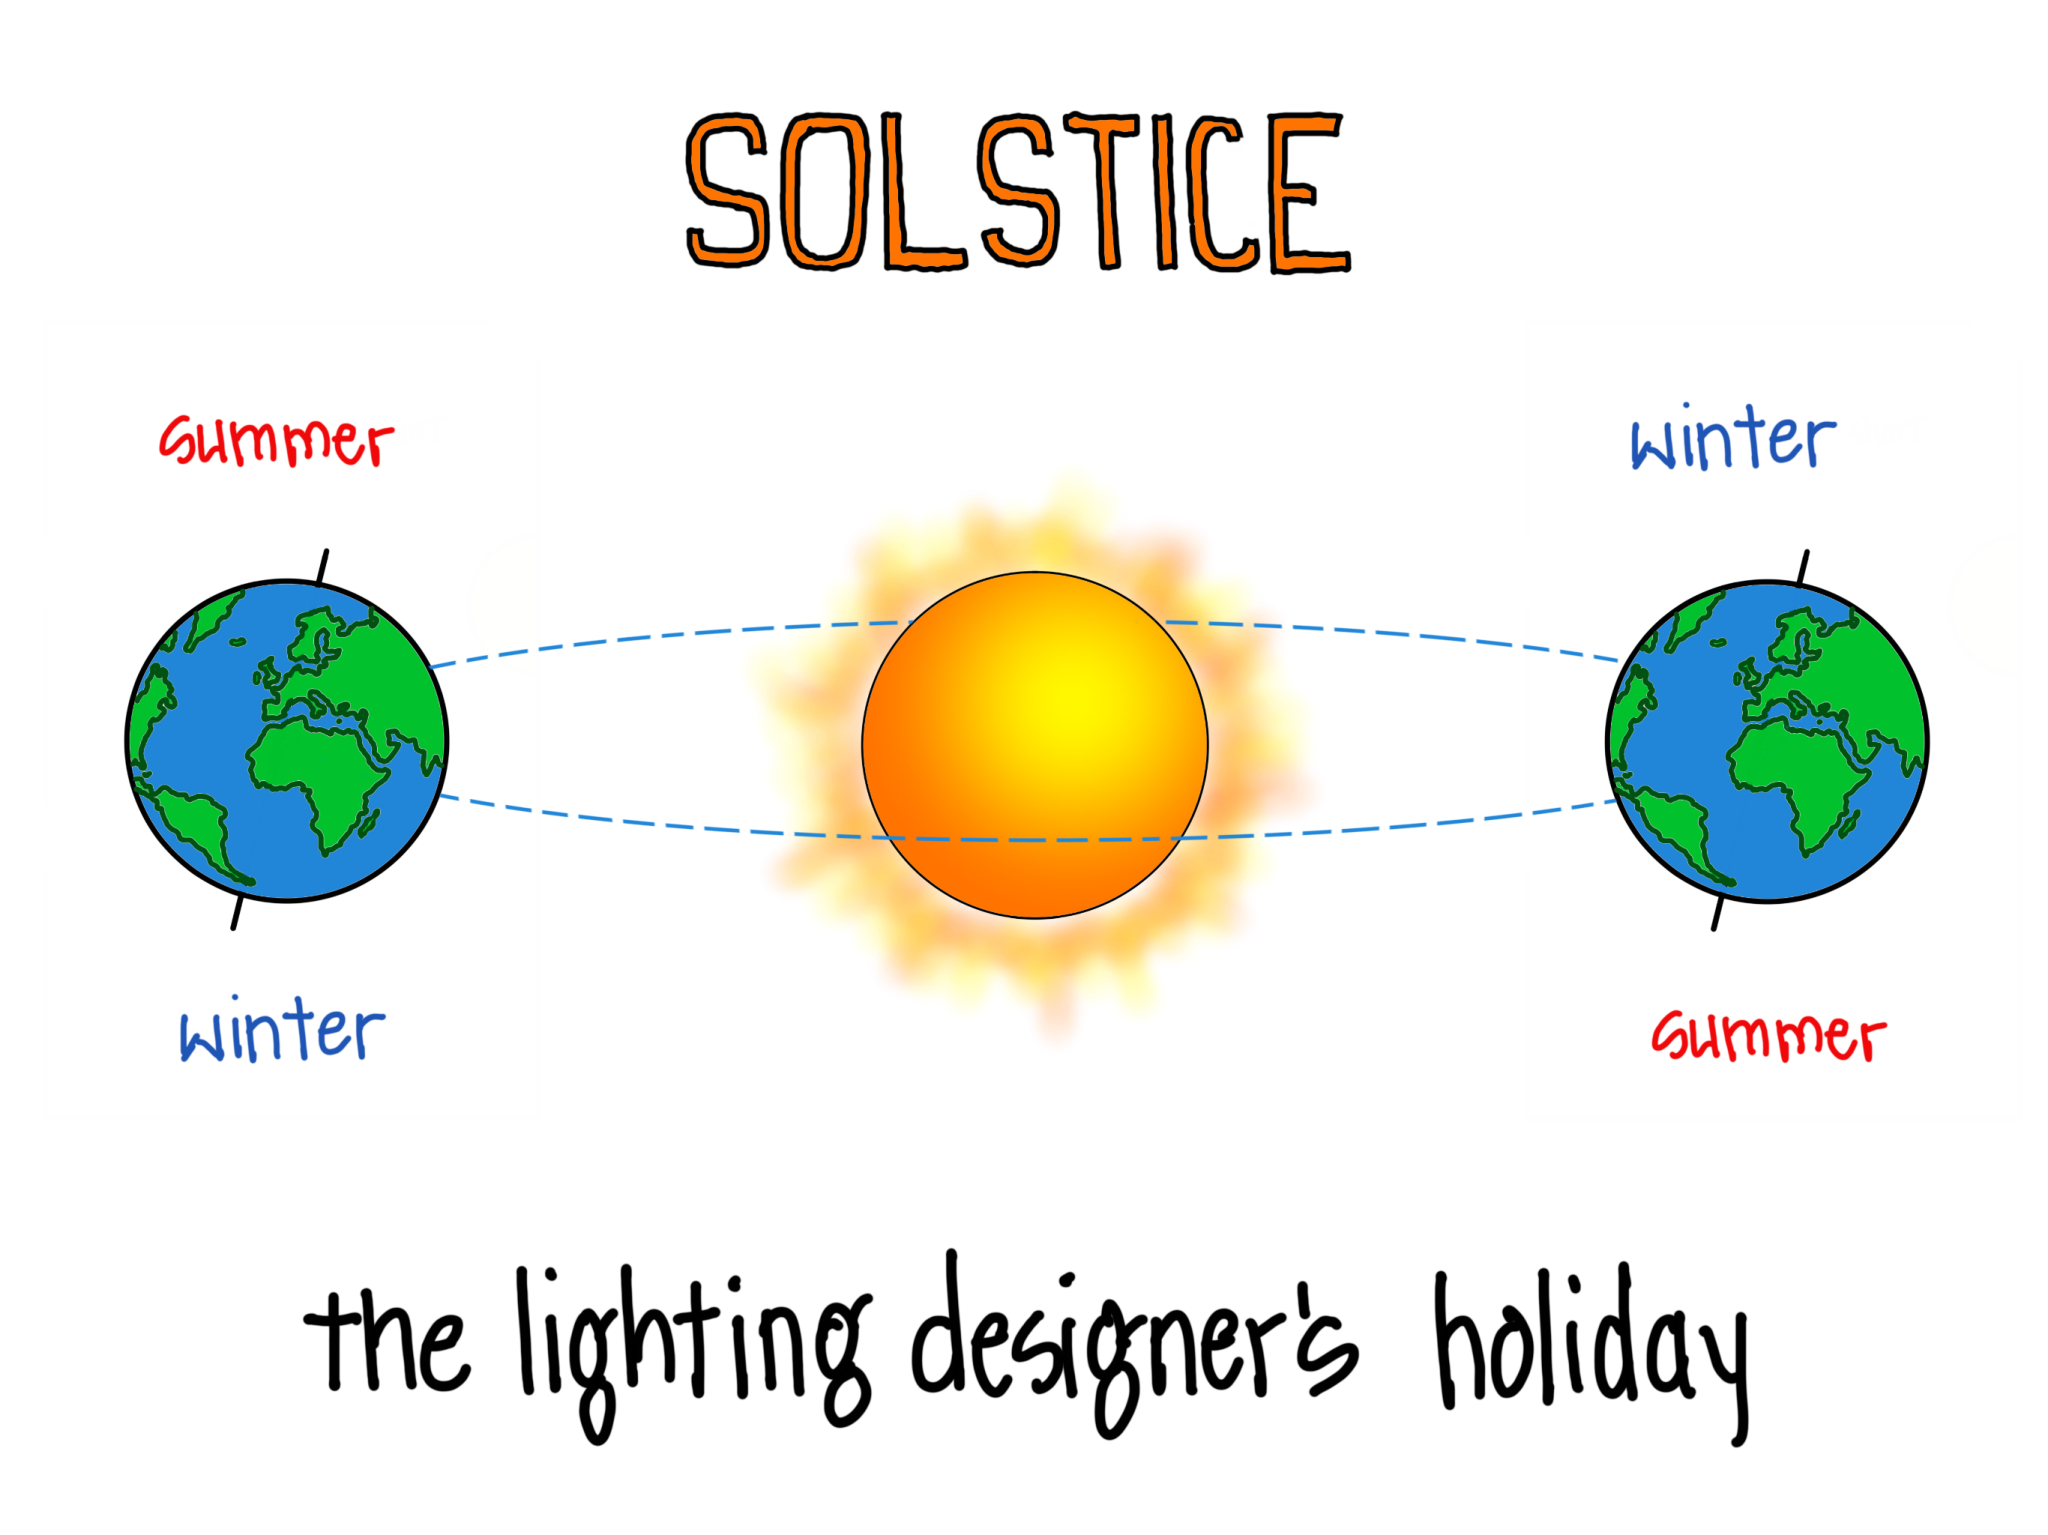 A diagram showing how the earths tilt as it goes around the sun causes winter/summer seasons with the title "the lighting designer's holiday"